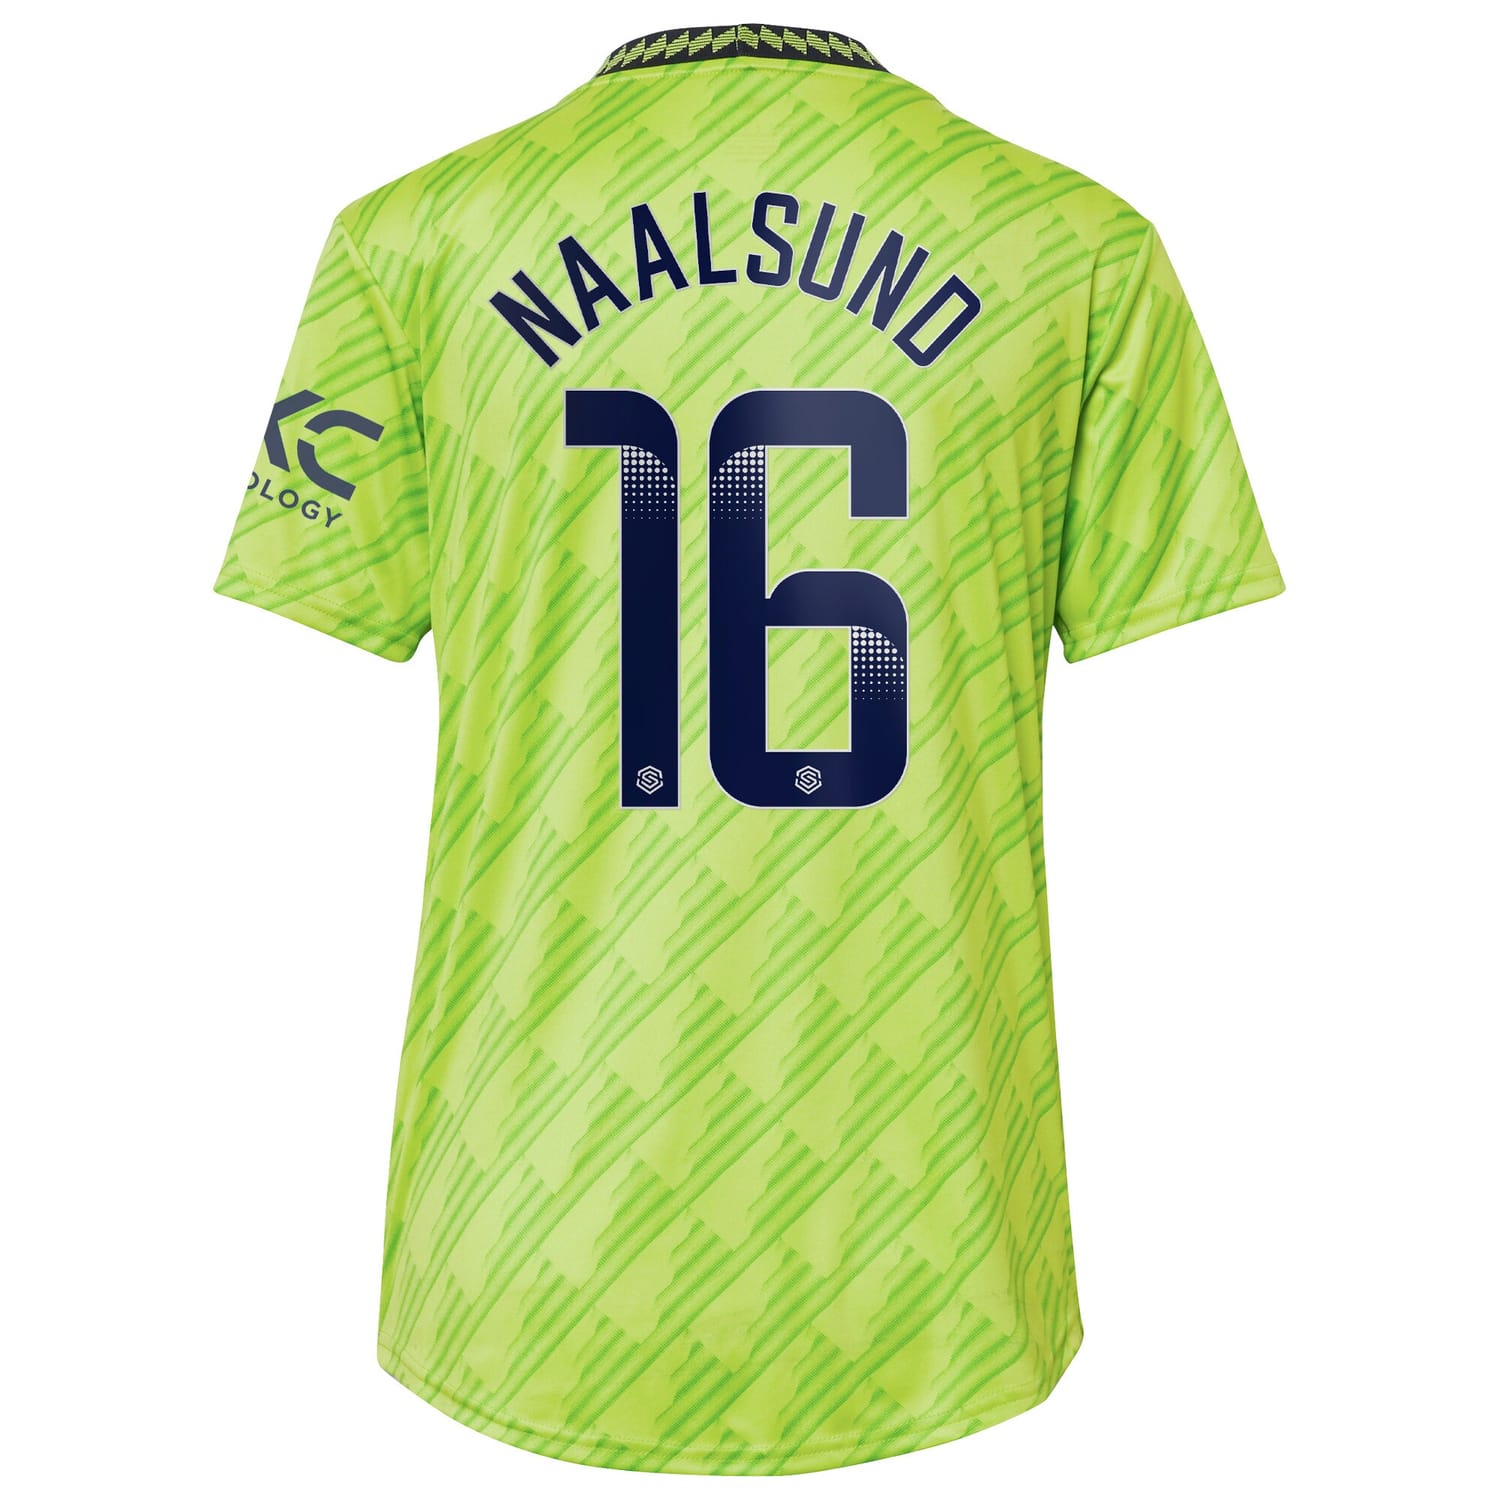 Premier League Manchester United Third WSL Authentic Jersey Shirt 2022-23 player Lisa Naalsund 16 printing for Women